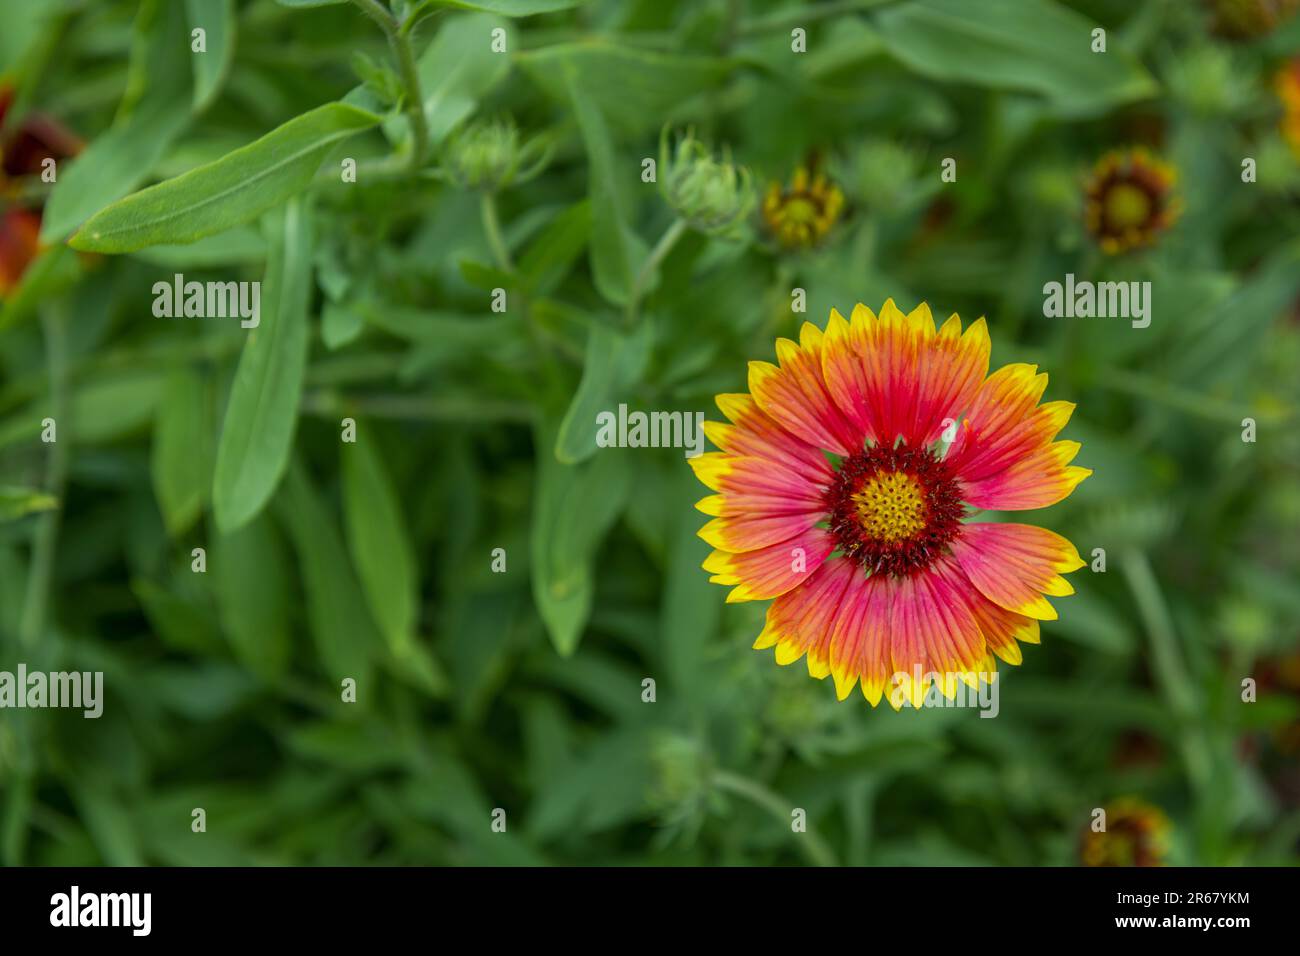 Like cactus flowers, for example, gazania flowers open in the sunlight and close at sunset, causing a curious phenomenon in your garden Stock Photo